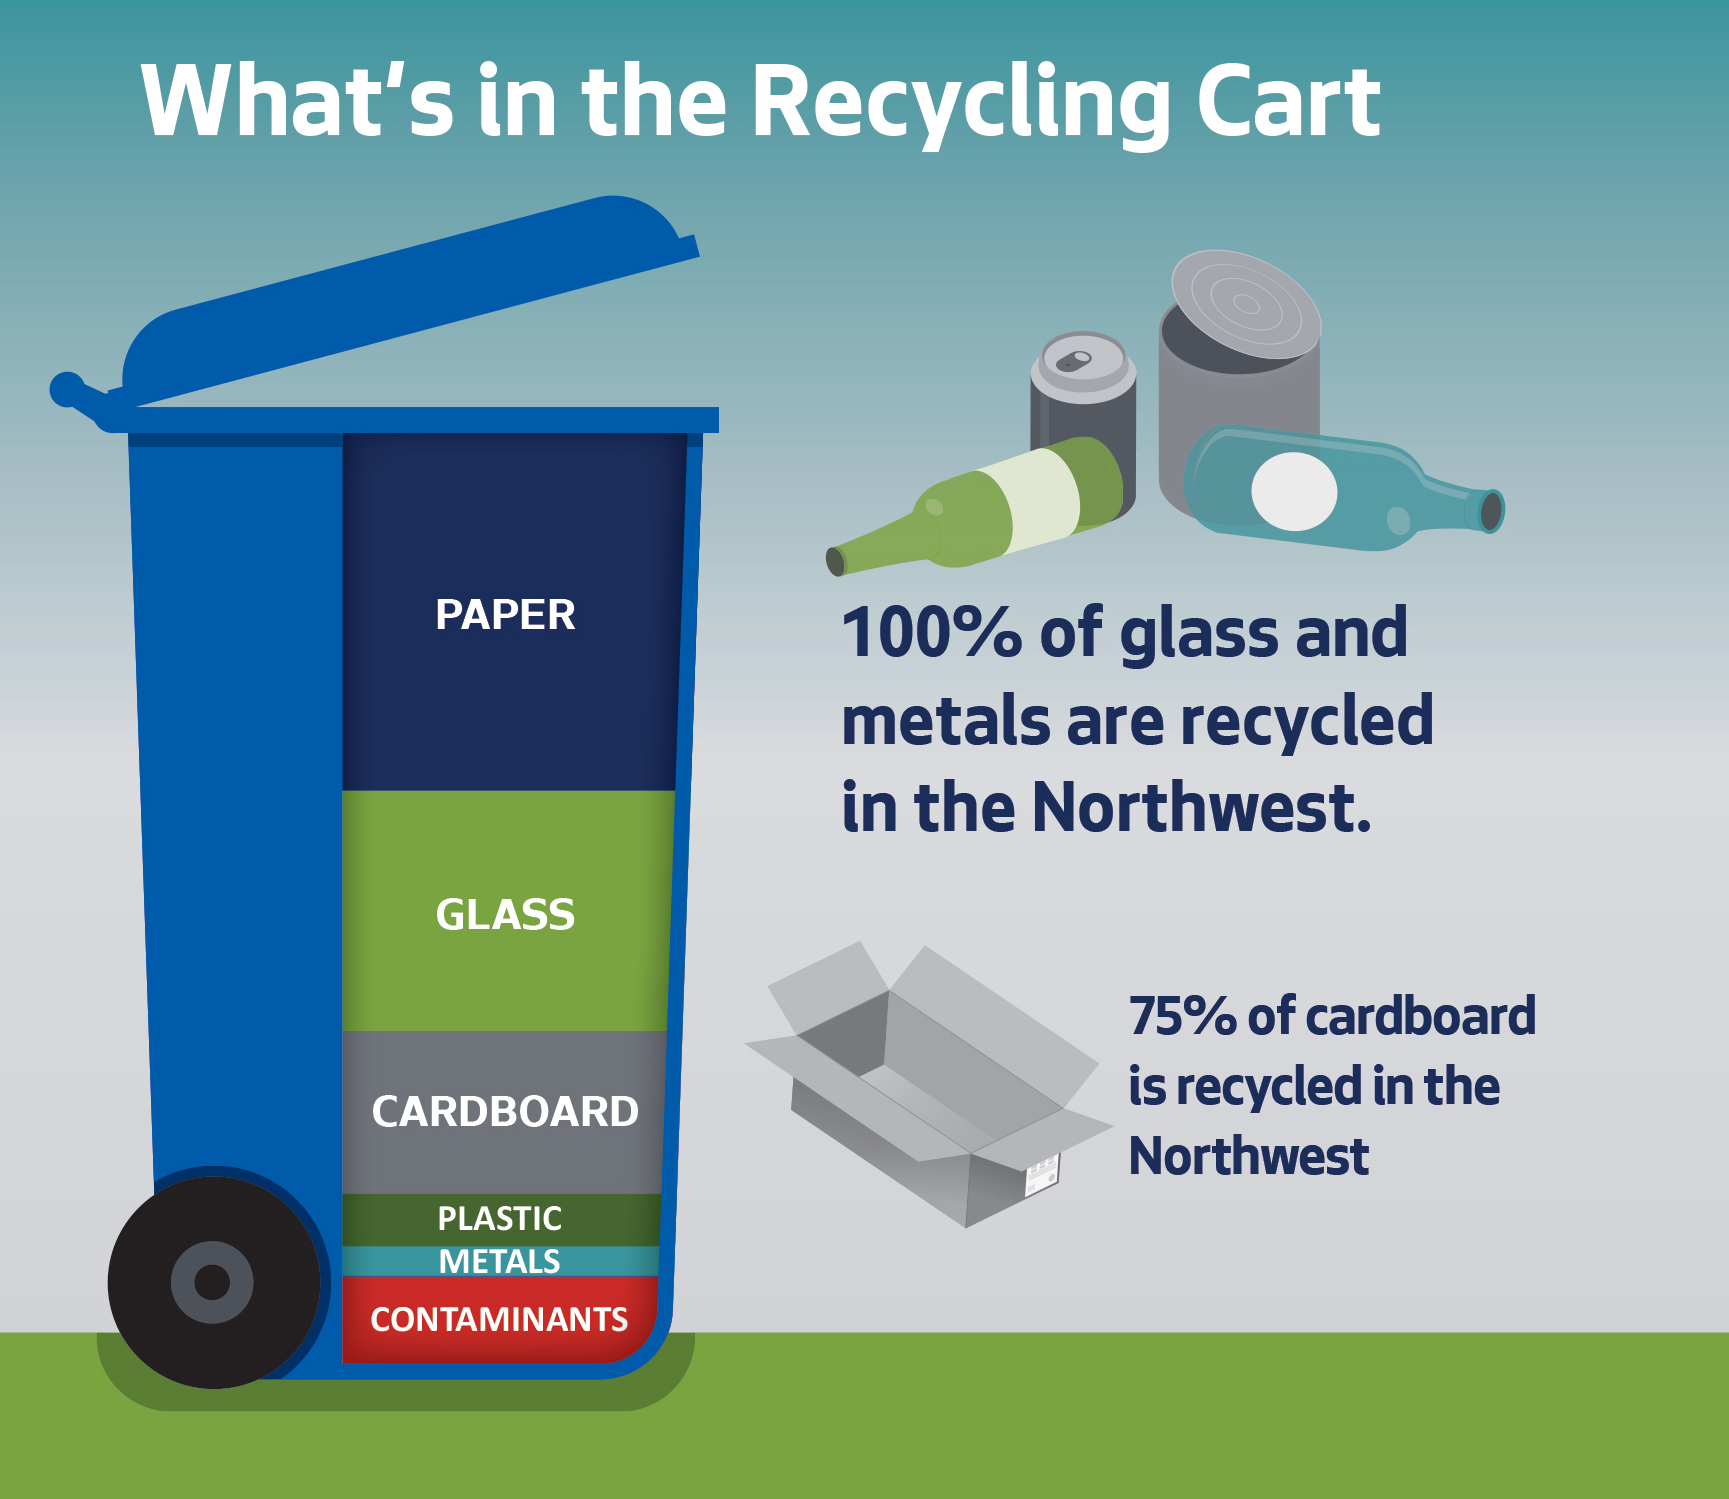 Recycling a la carte - Recycling Today